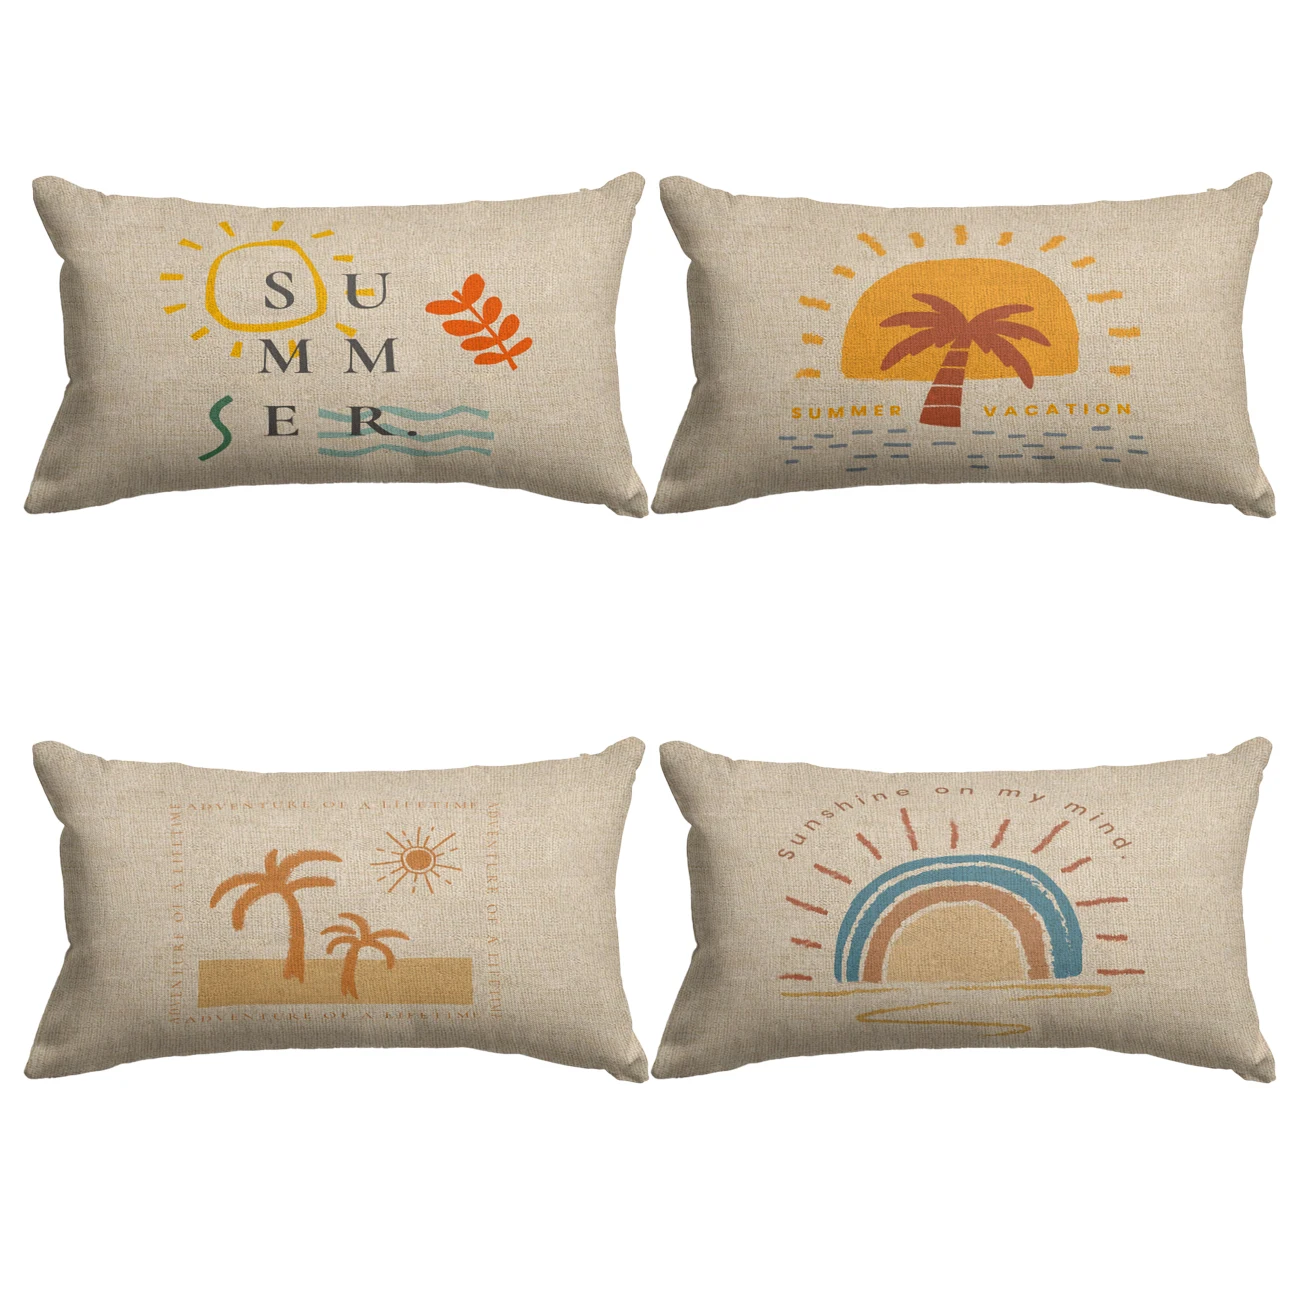 

Sunny summer beach vacation Rectangle Cushion Cover Pillow Case 30x50 Decorative Sofa Home Living Room Decoration